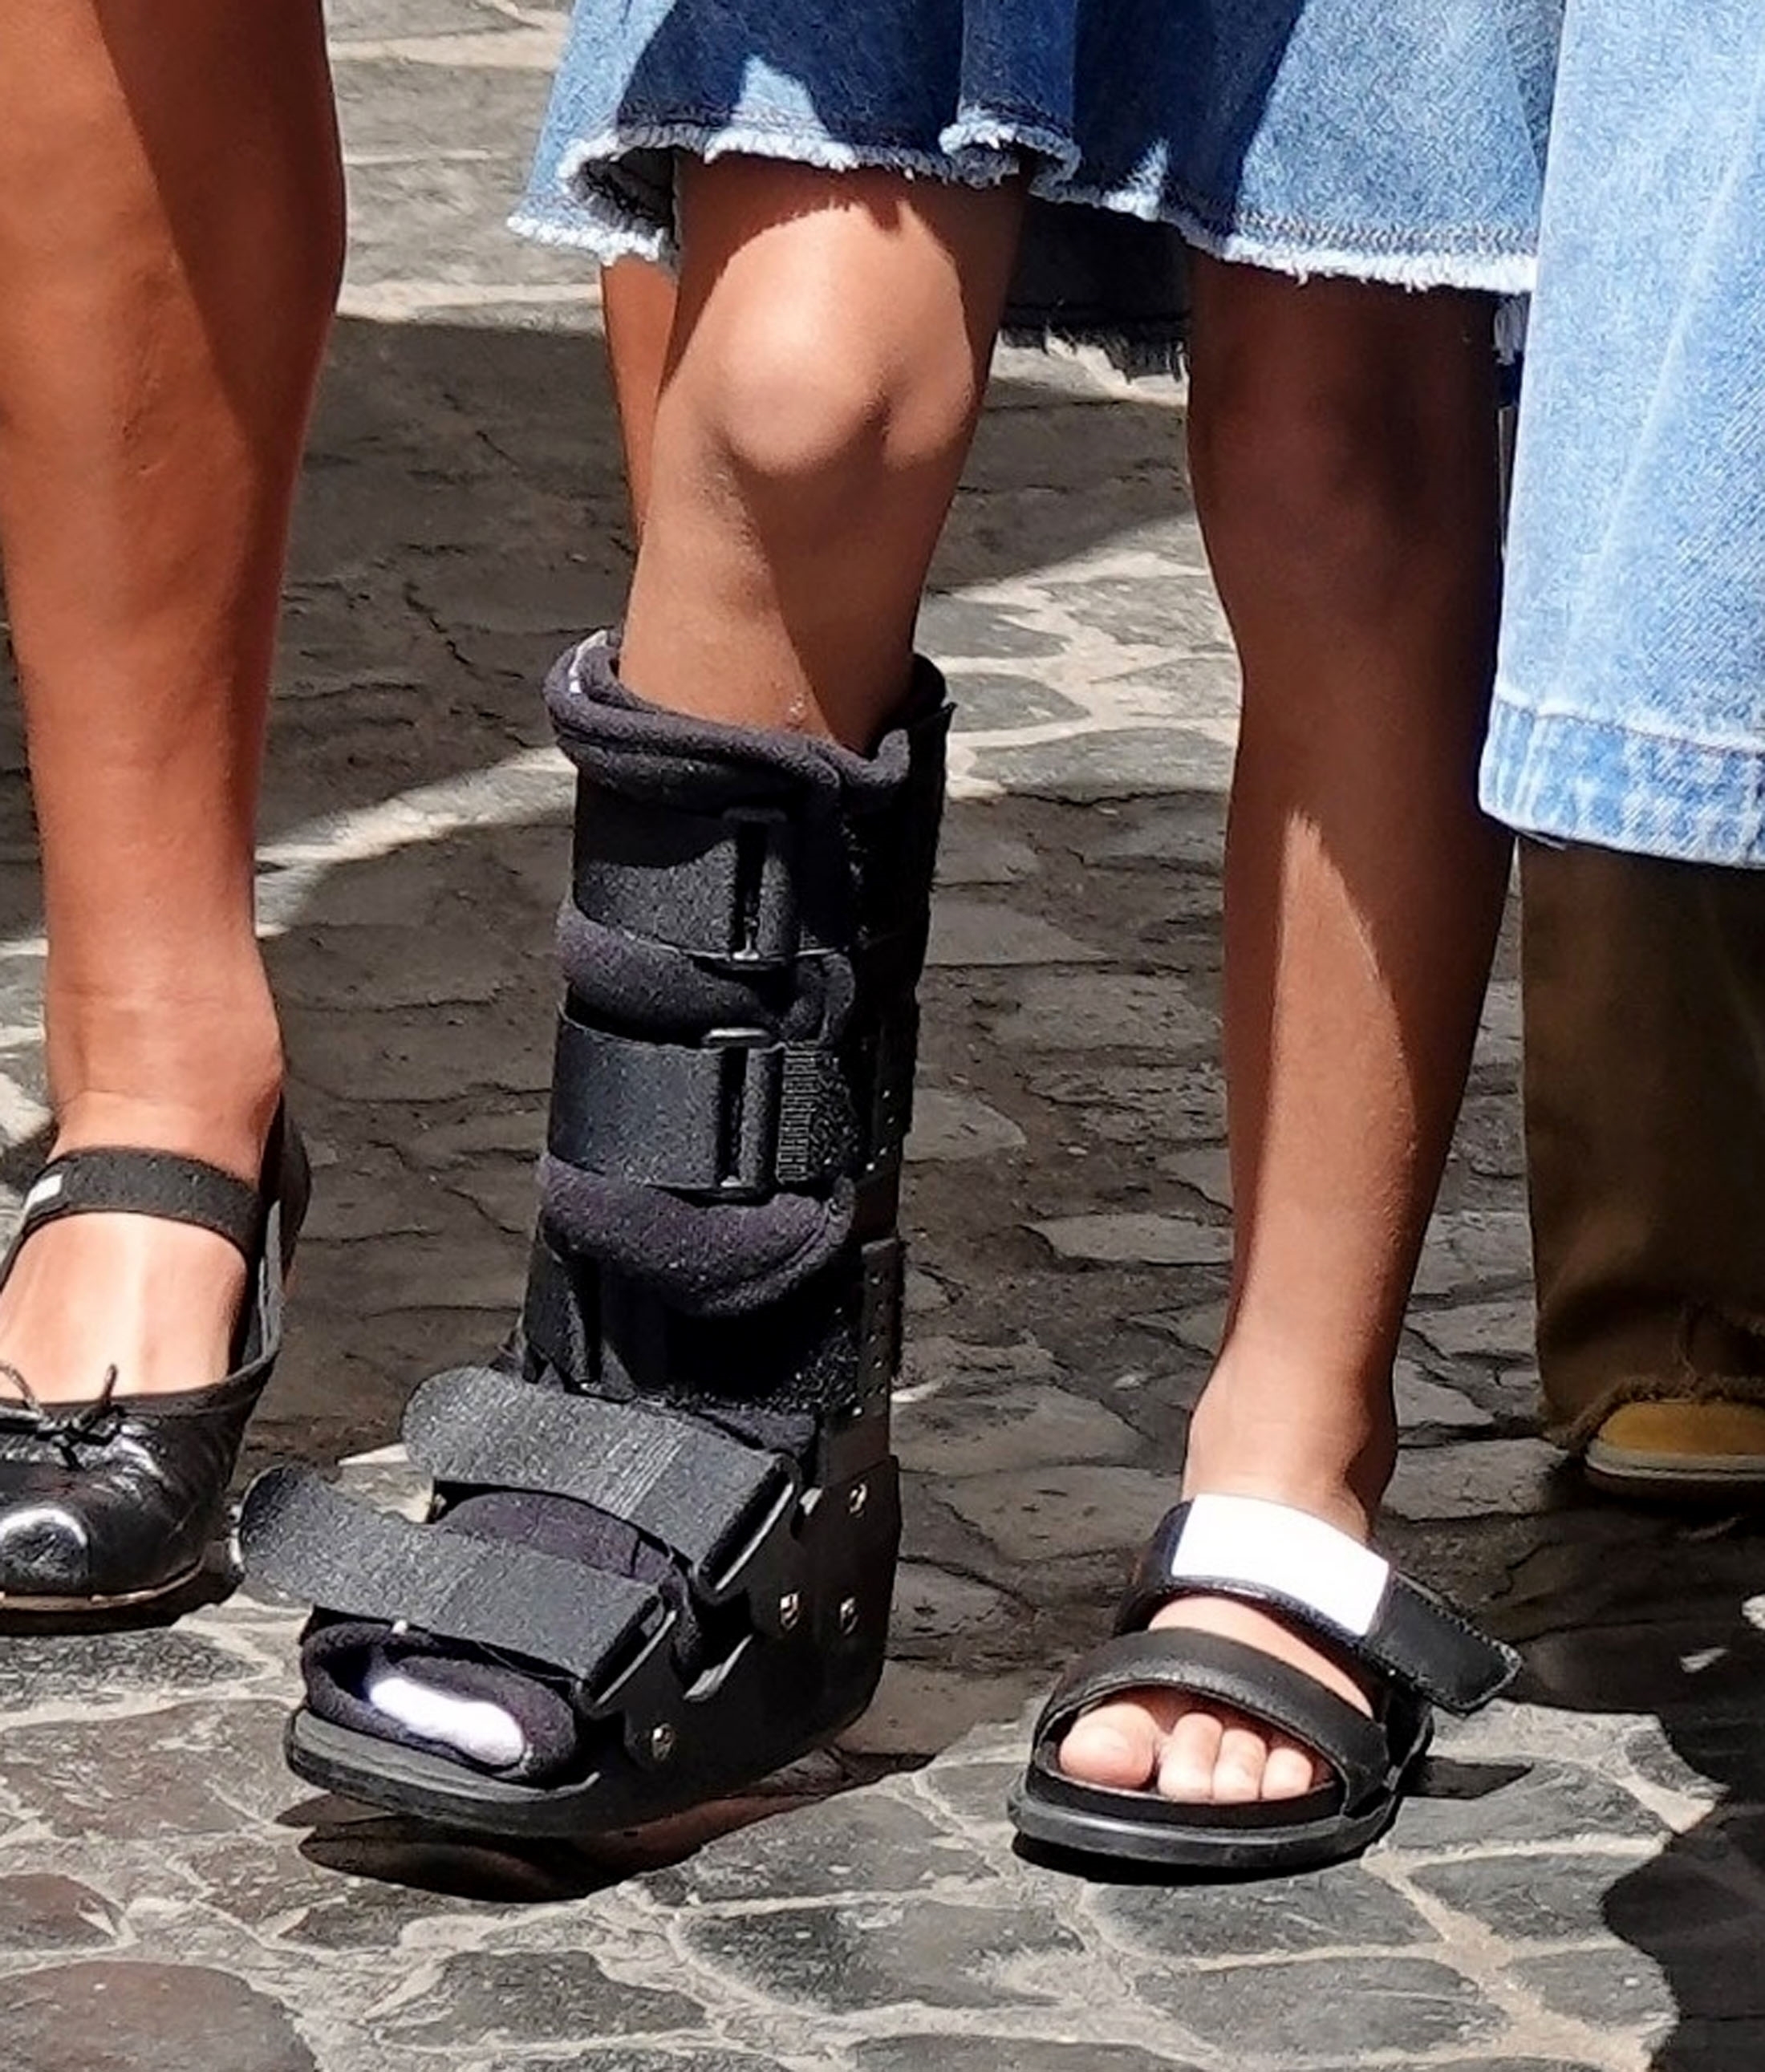 Fans also noticed Kylie Jenner's daughter Stormi was wearing a walking boot